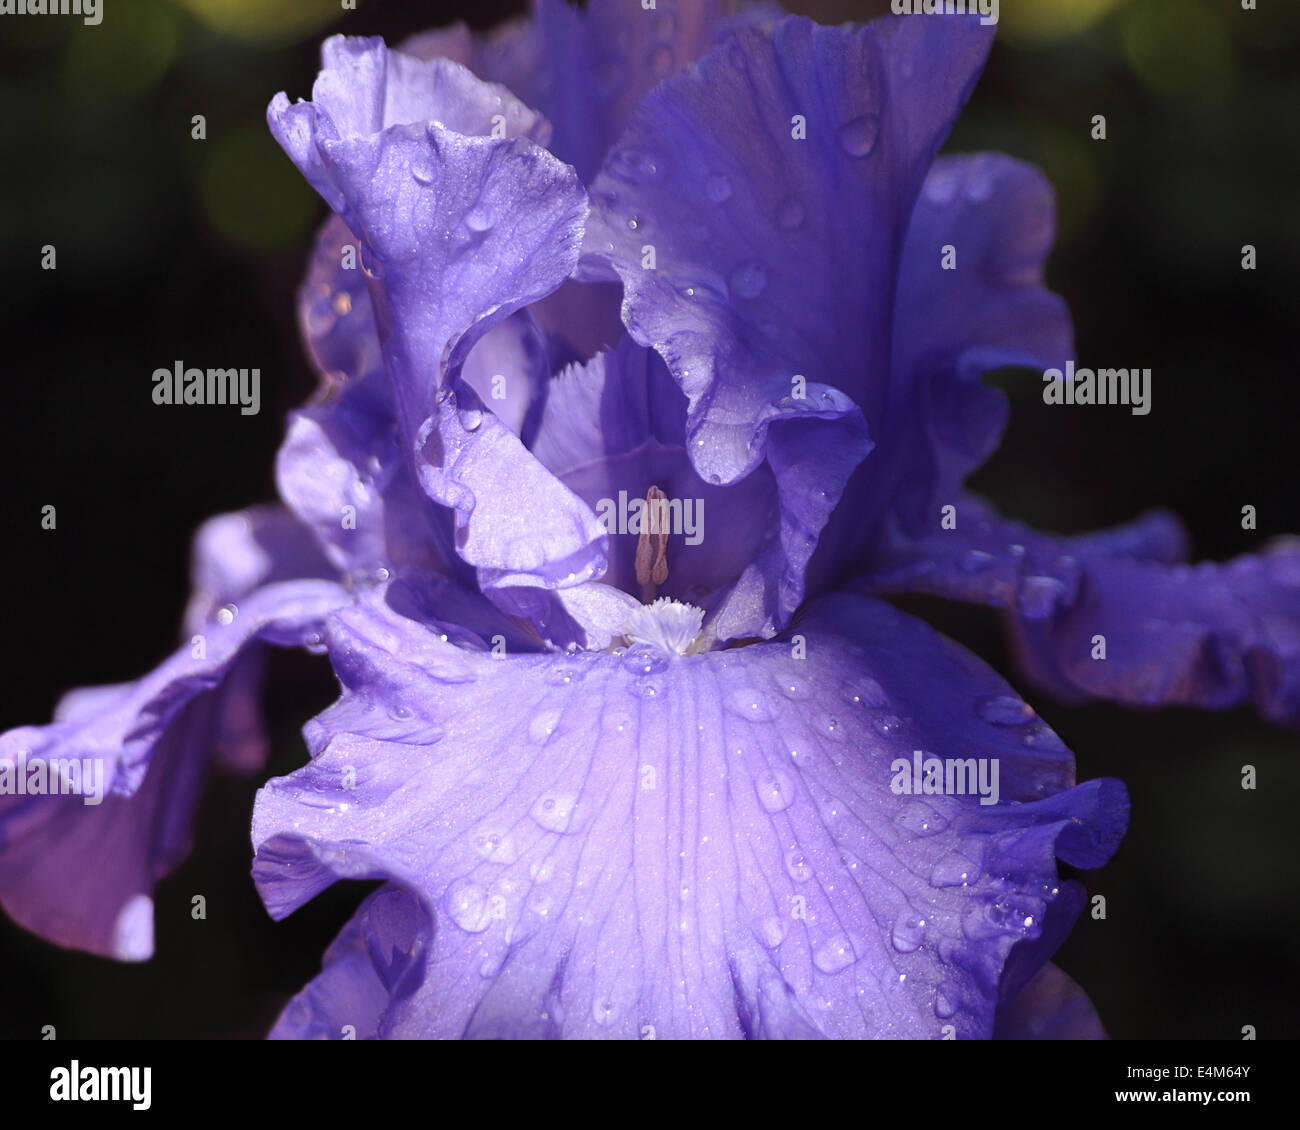 Morning sunlight shining on a blue-purple iris covered in water droplets Stock Photo